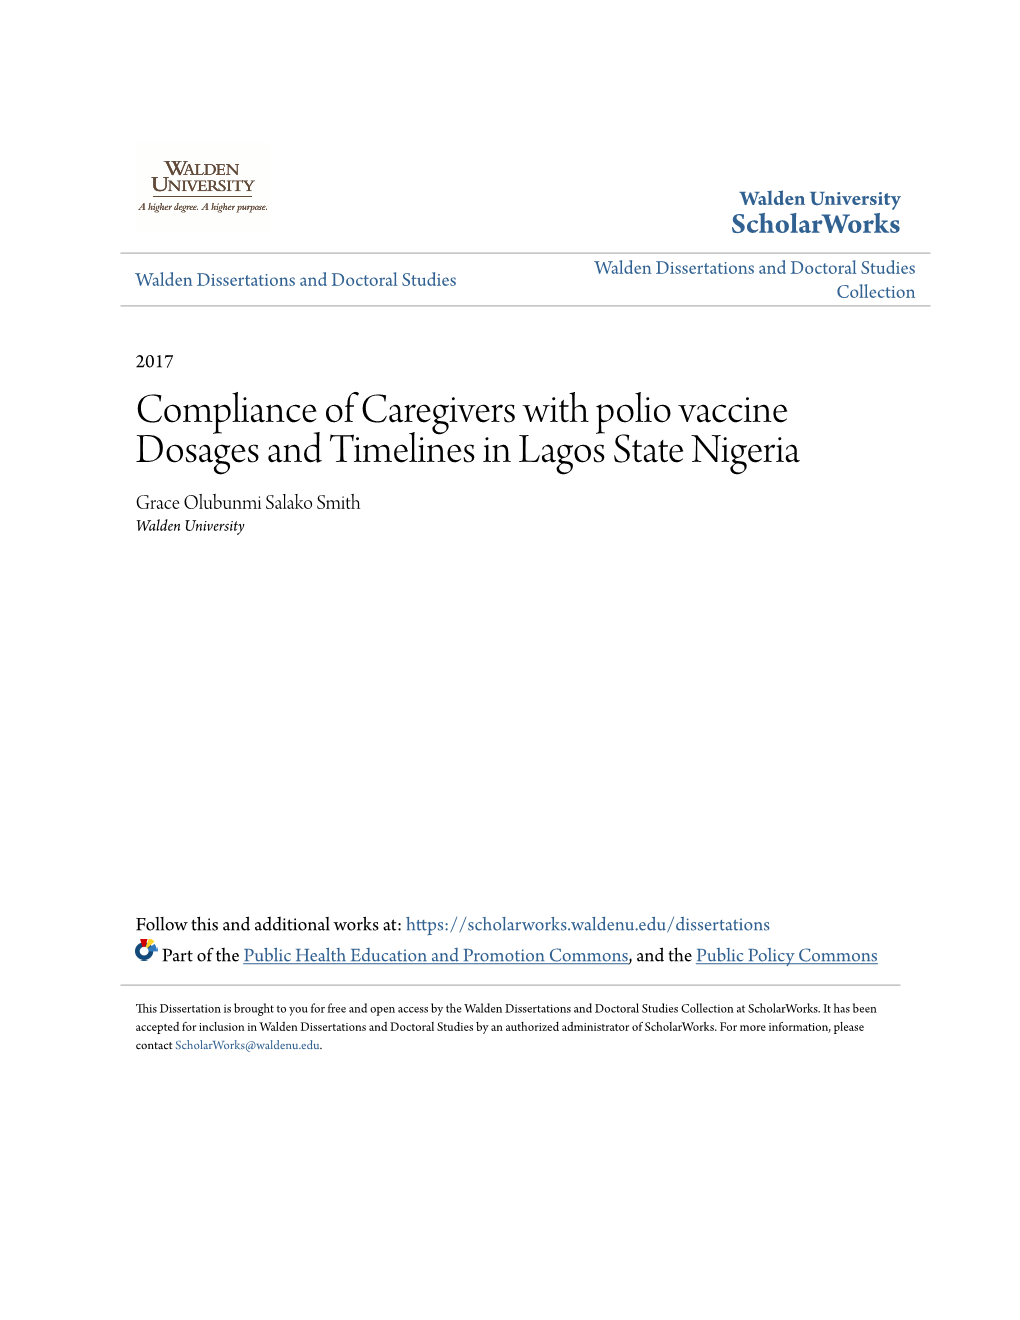 Compliance of Caregivers with Polio Vaccine Dosages and Timelines in Lagos State Nigeria Grace Olubunmi Salako Smith Walden University